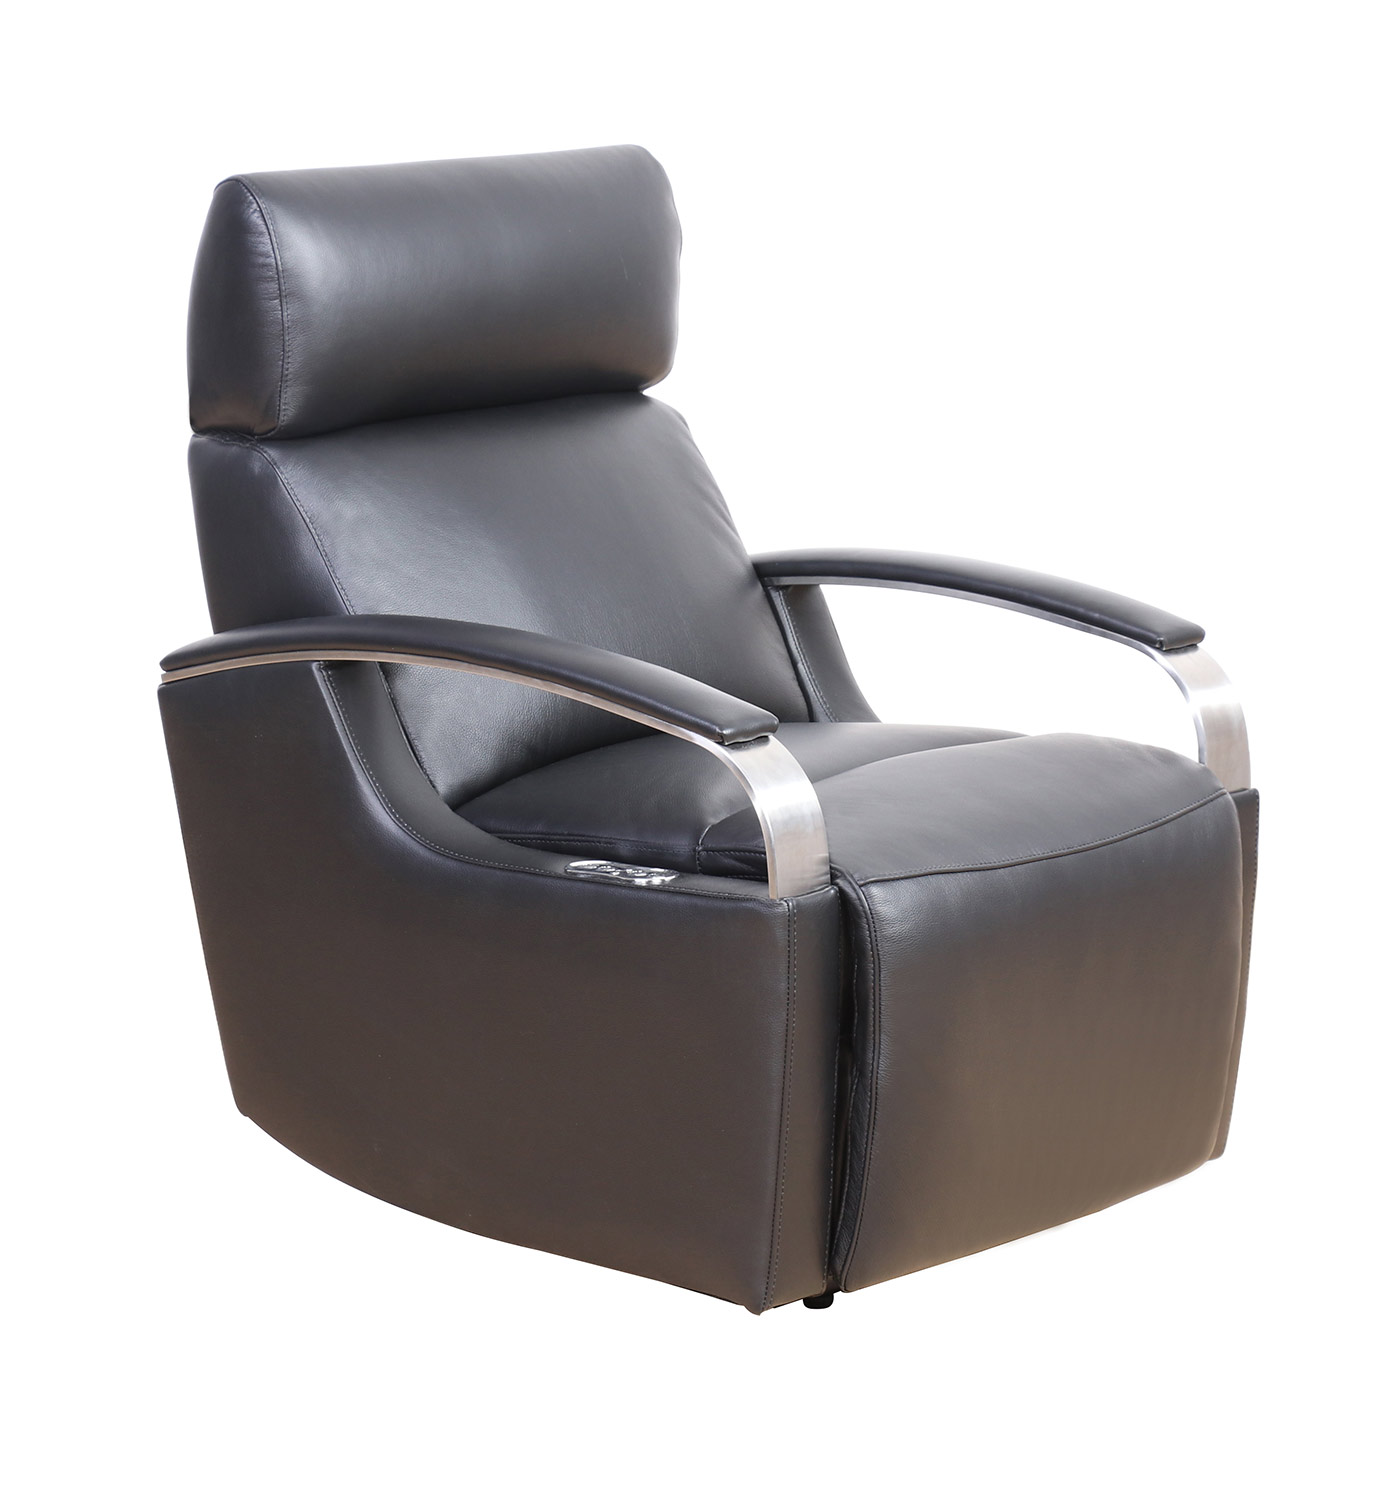 Barcalounger Cosmo Power Recliner Chair with Power Head Rest - Apollo Onyx/Leather Match